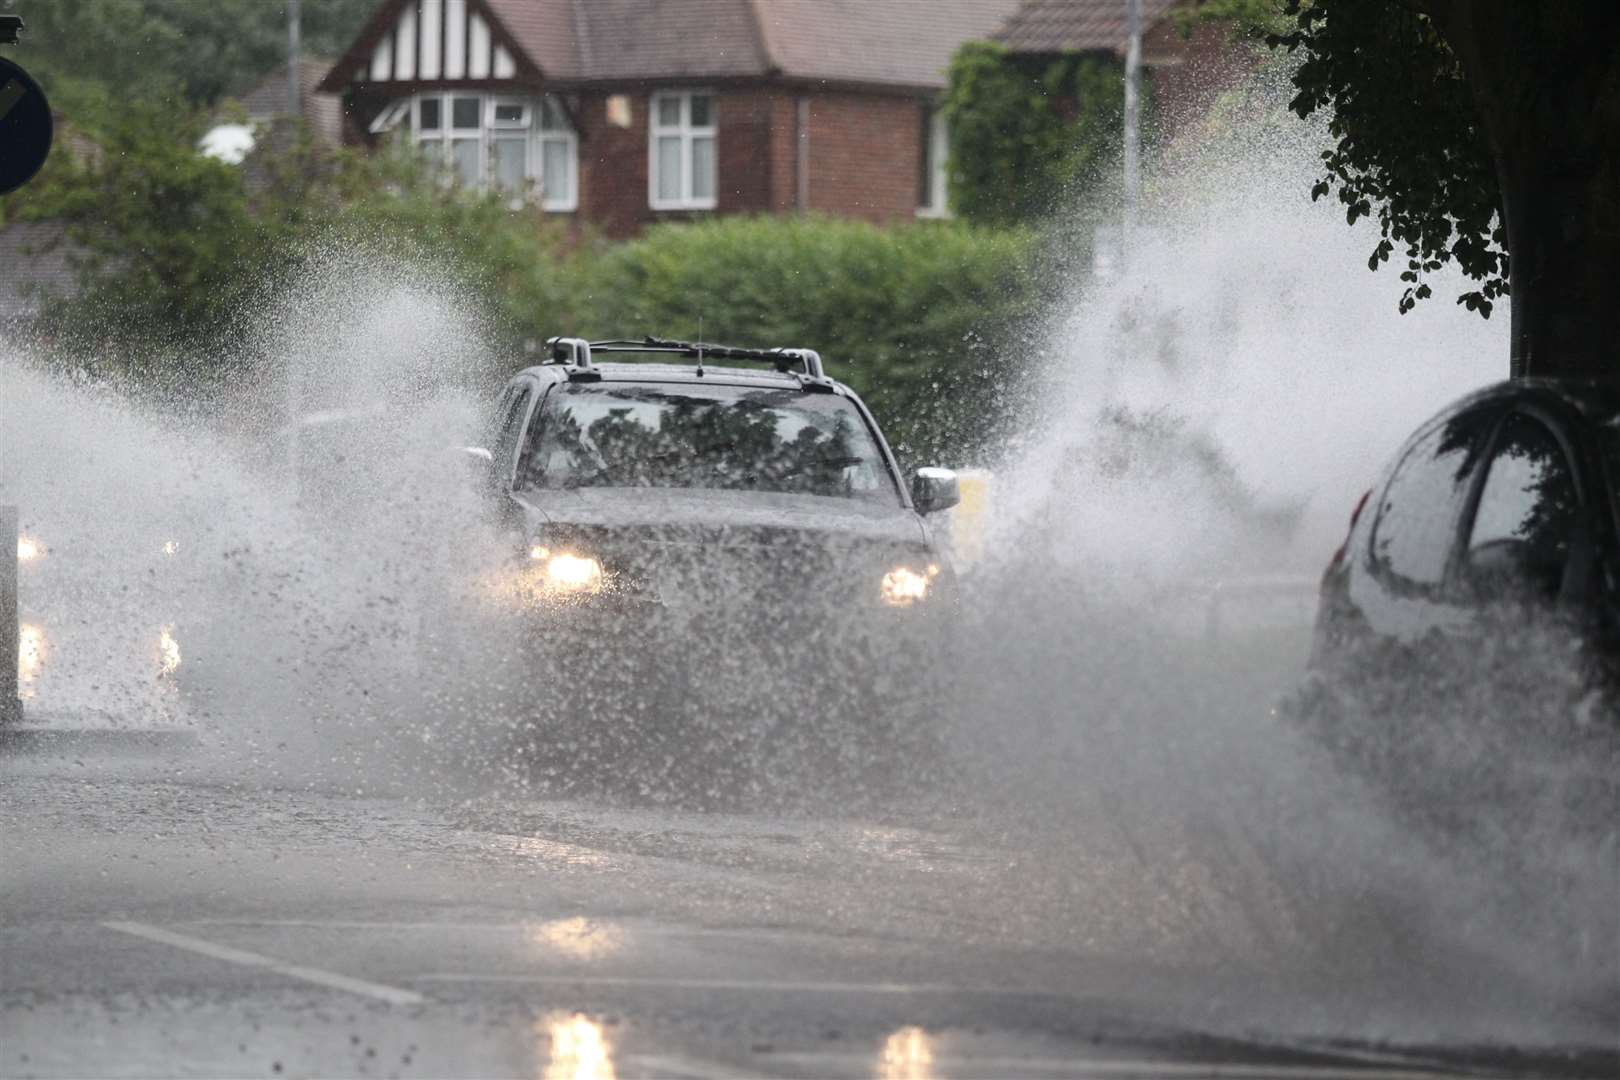 Heavy rain is expected in Kent later today